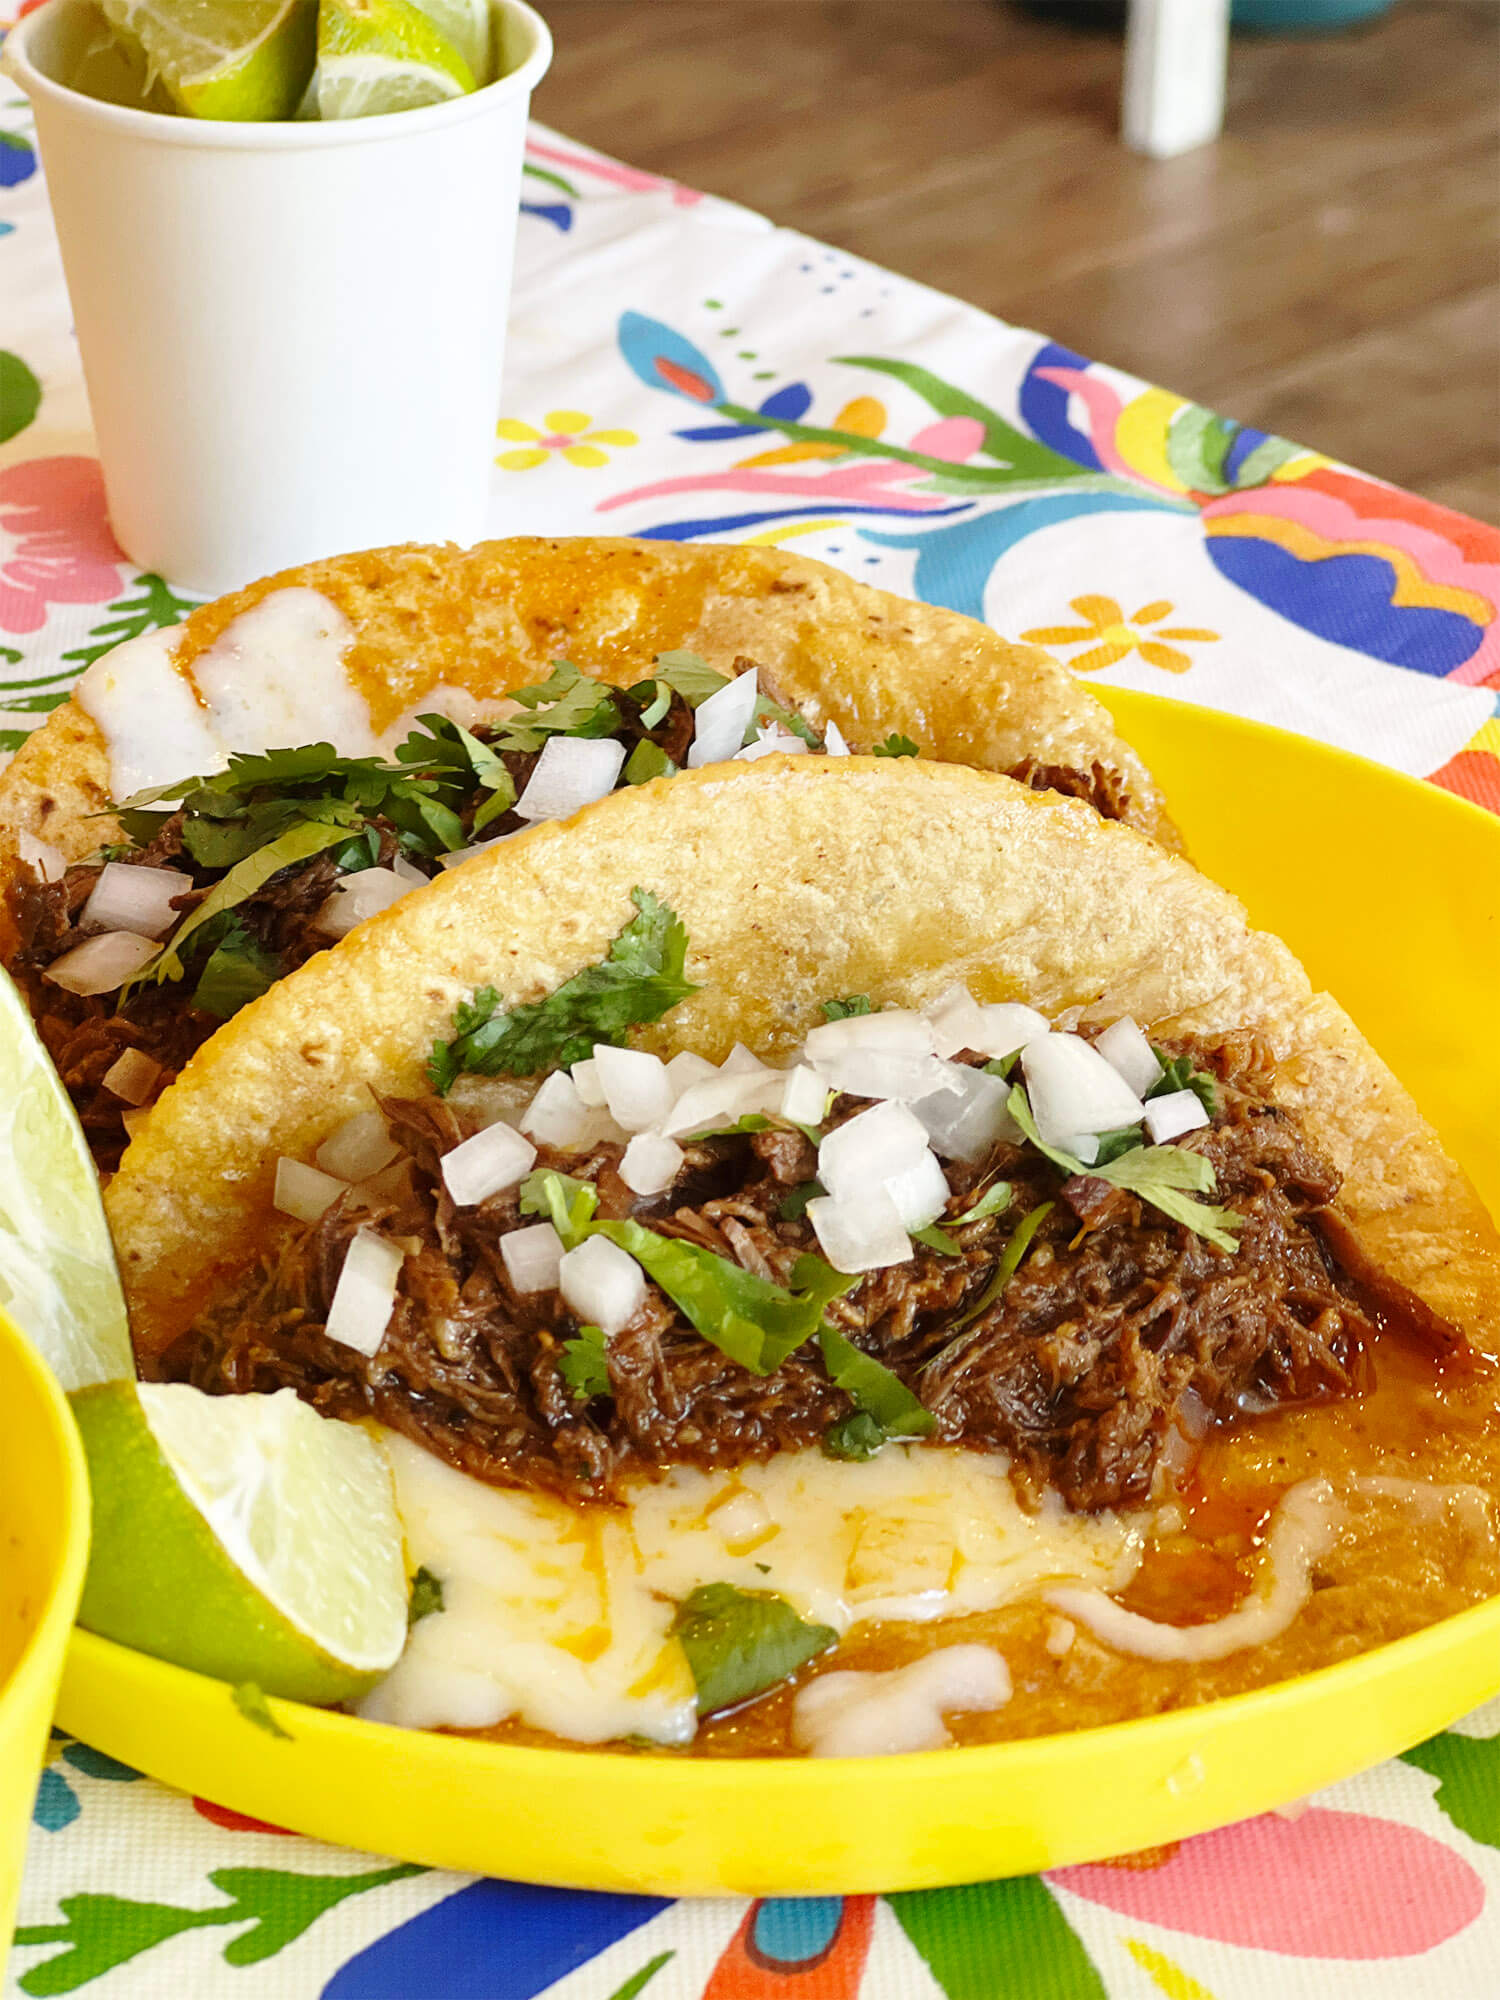 Chofi Taco in Union City - Trying birria tacos for the first time